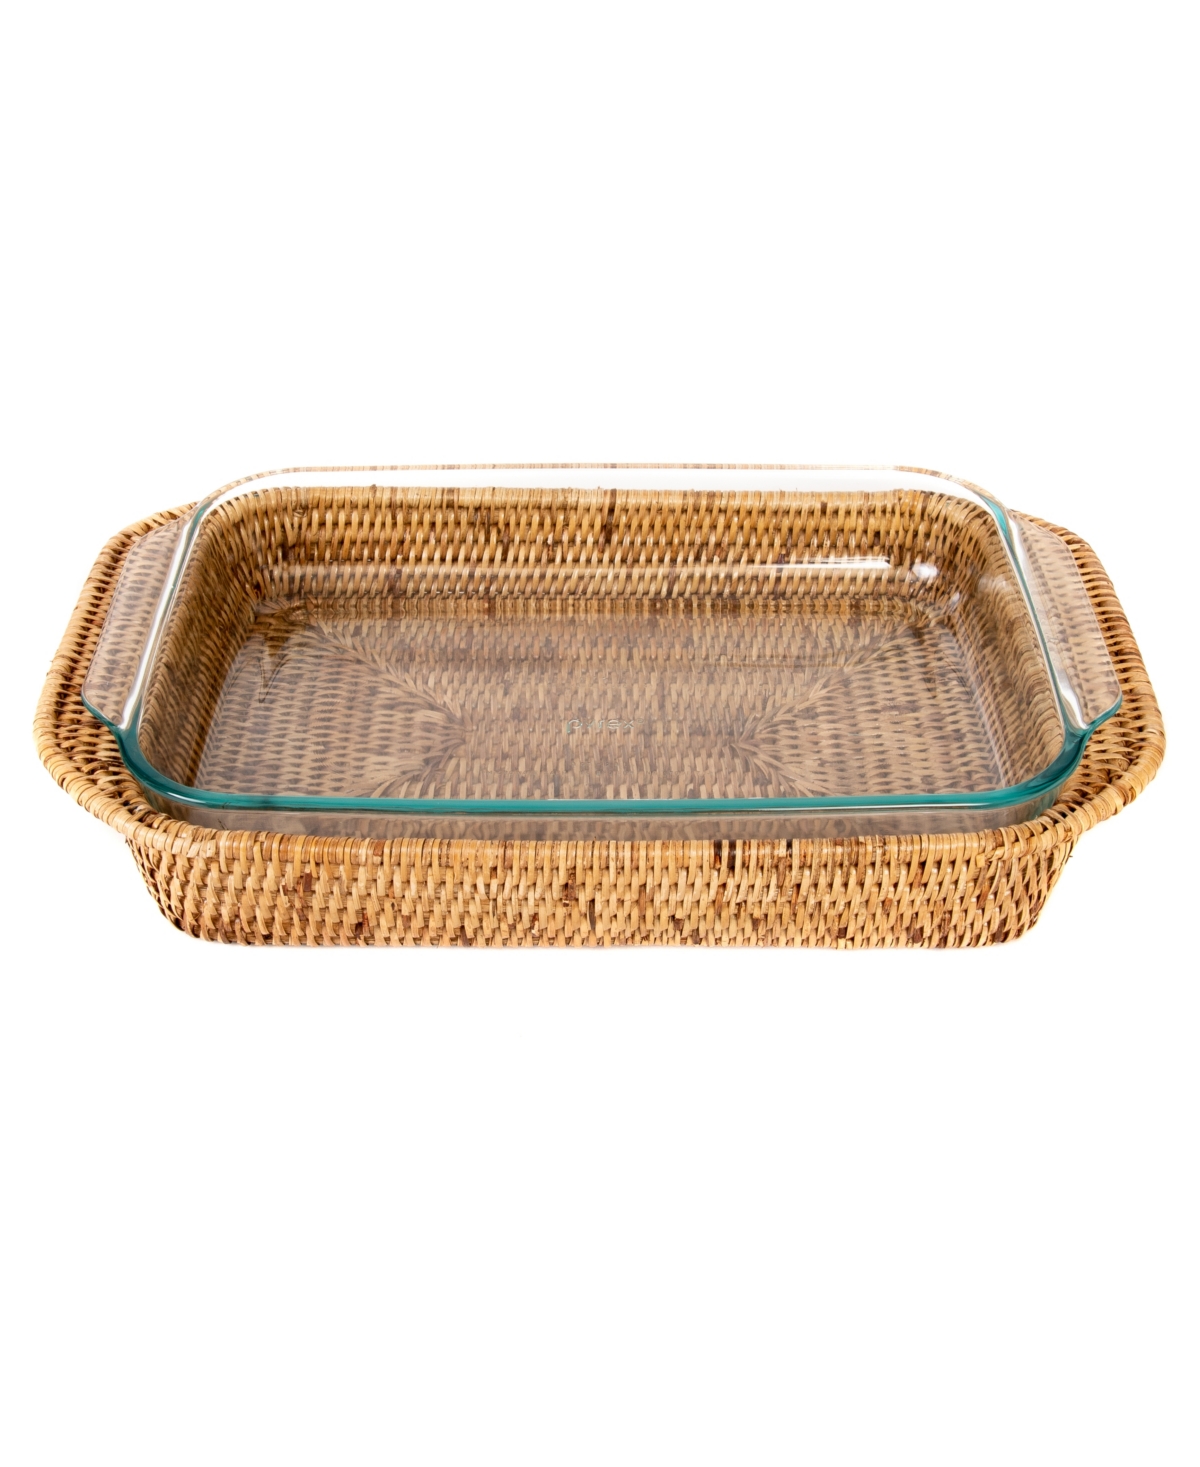 Artifacts Trading Company Artifacts Rattan Rectangular Baker Basket With Pyrex In Honey Brown